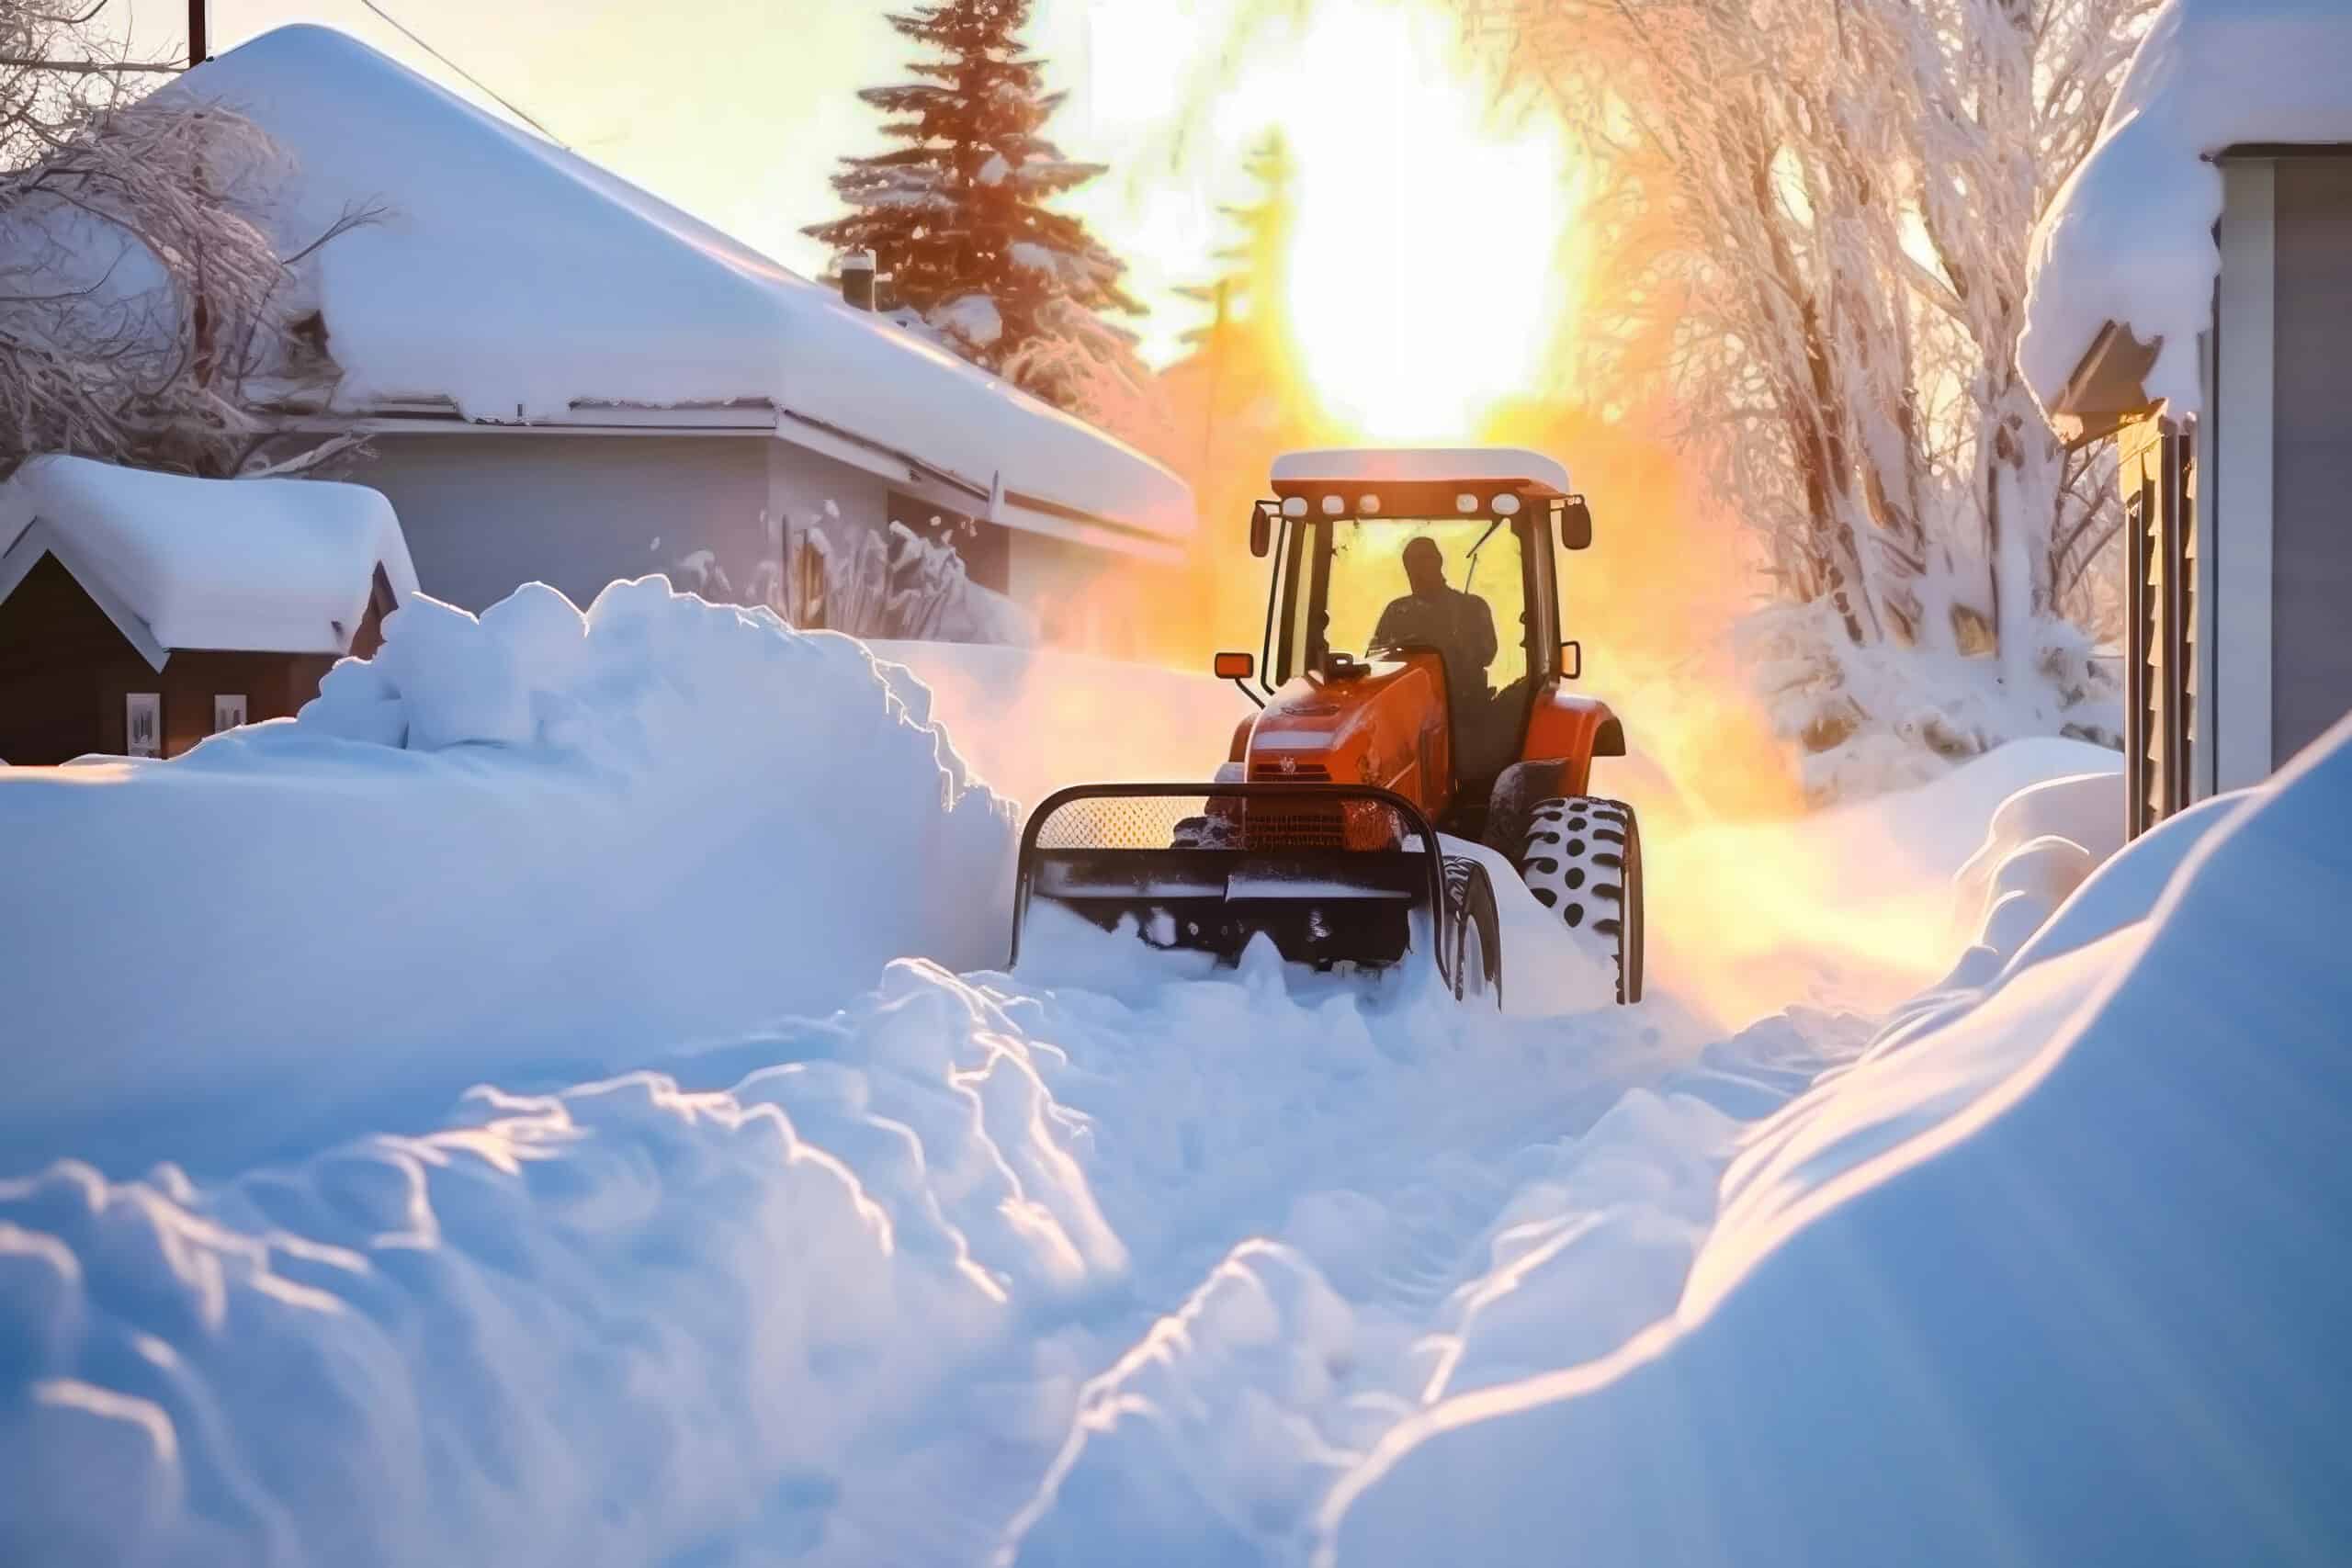 www.appr.com : Are electric snow blowers effective?